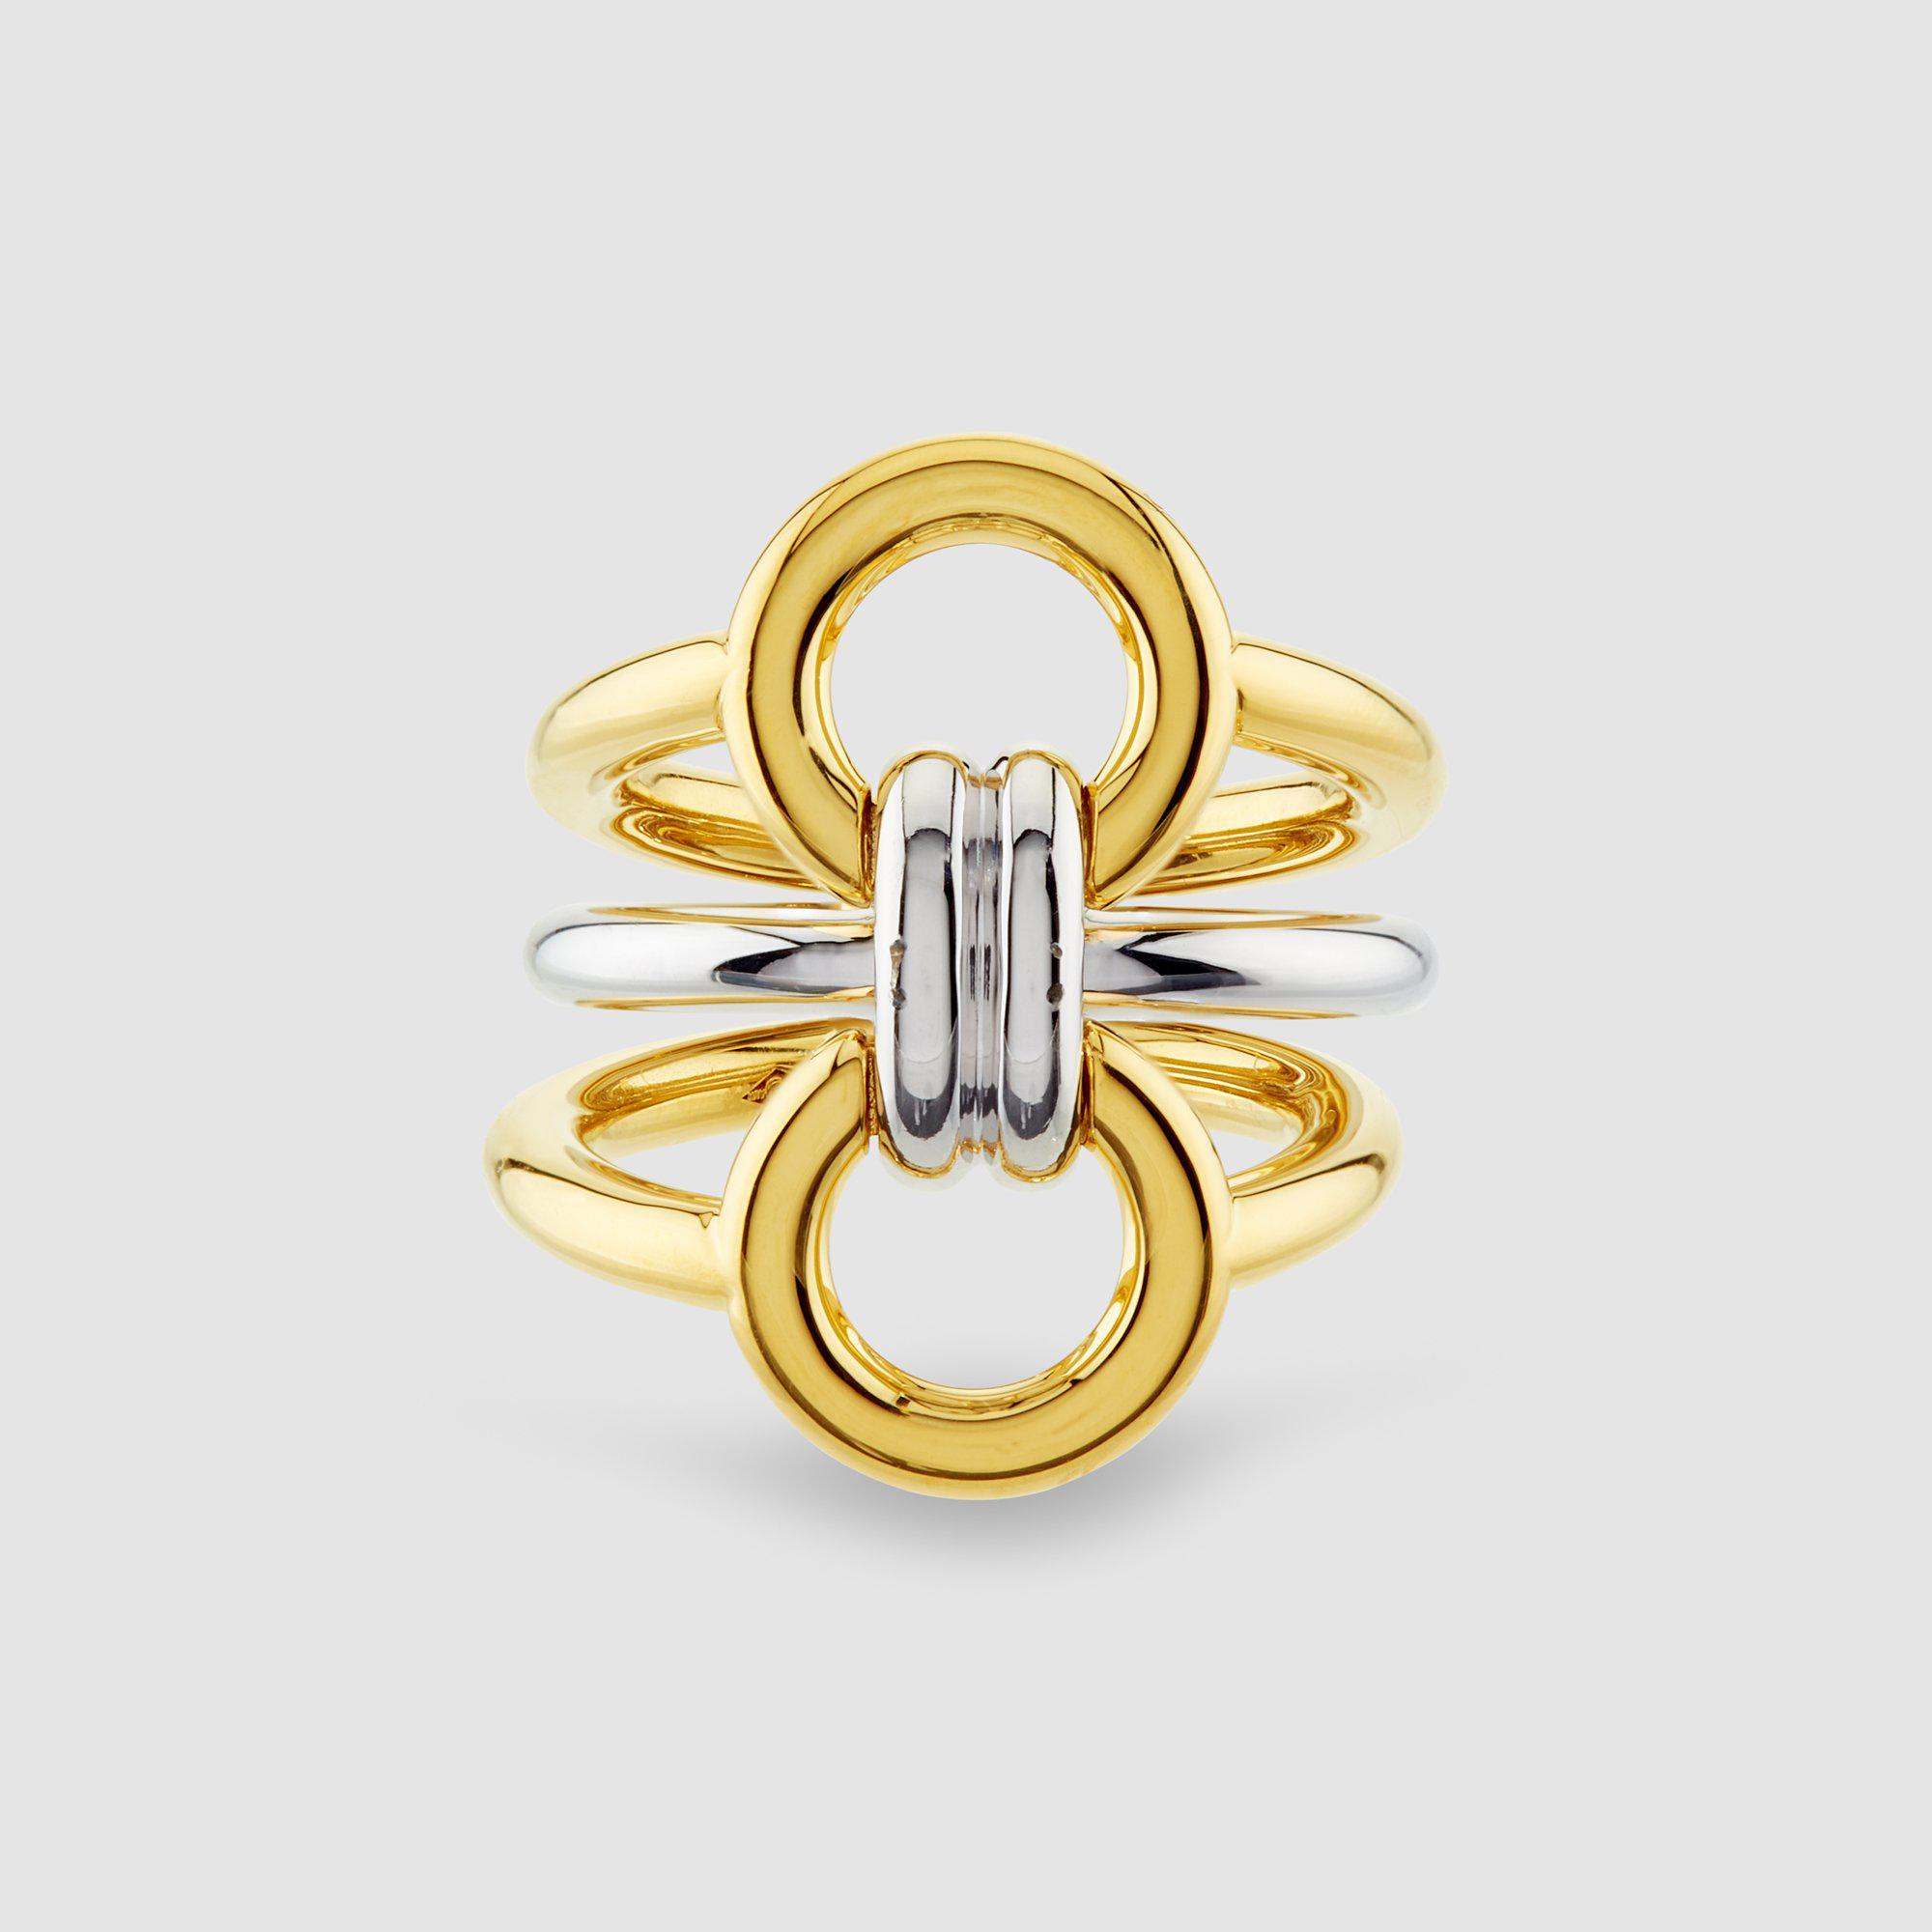 Charlotte Chesnais Tryptich Ring Gold by CHARLOTTE CHESNAIS